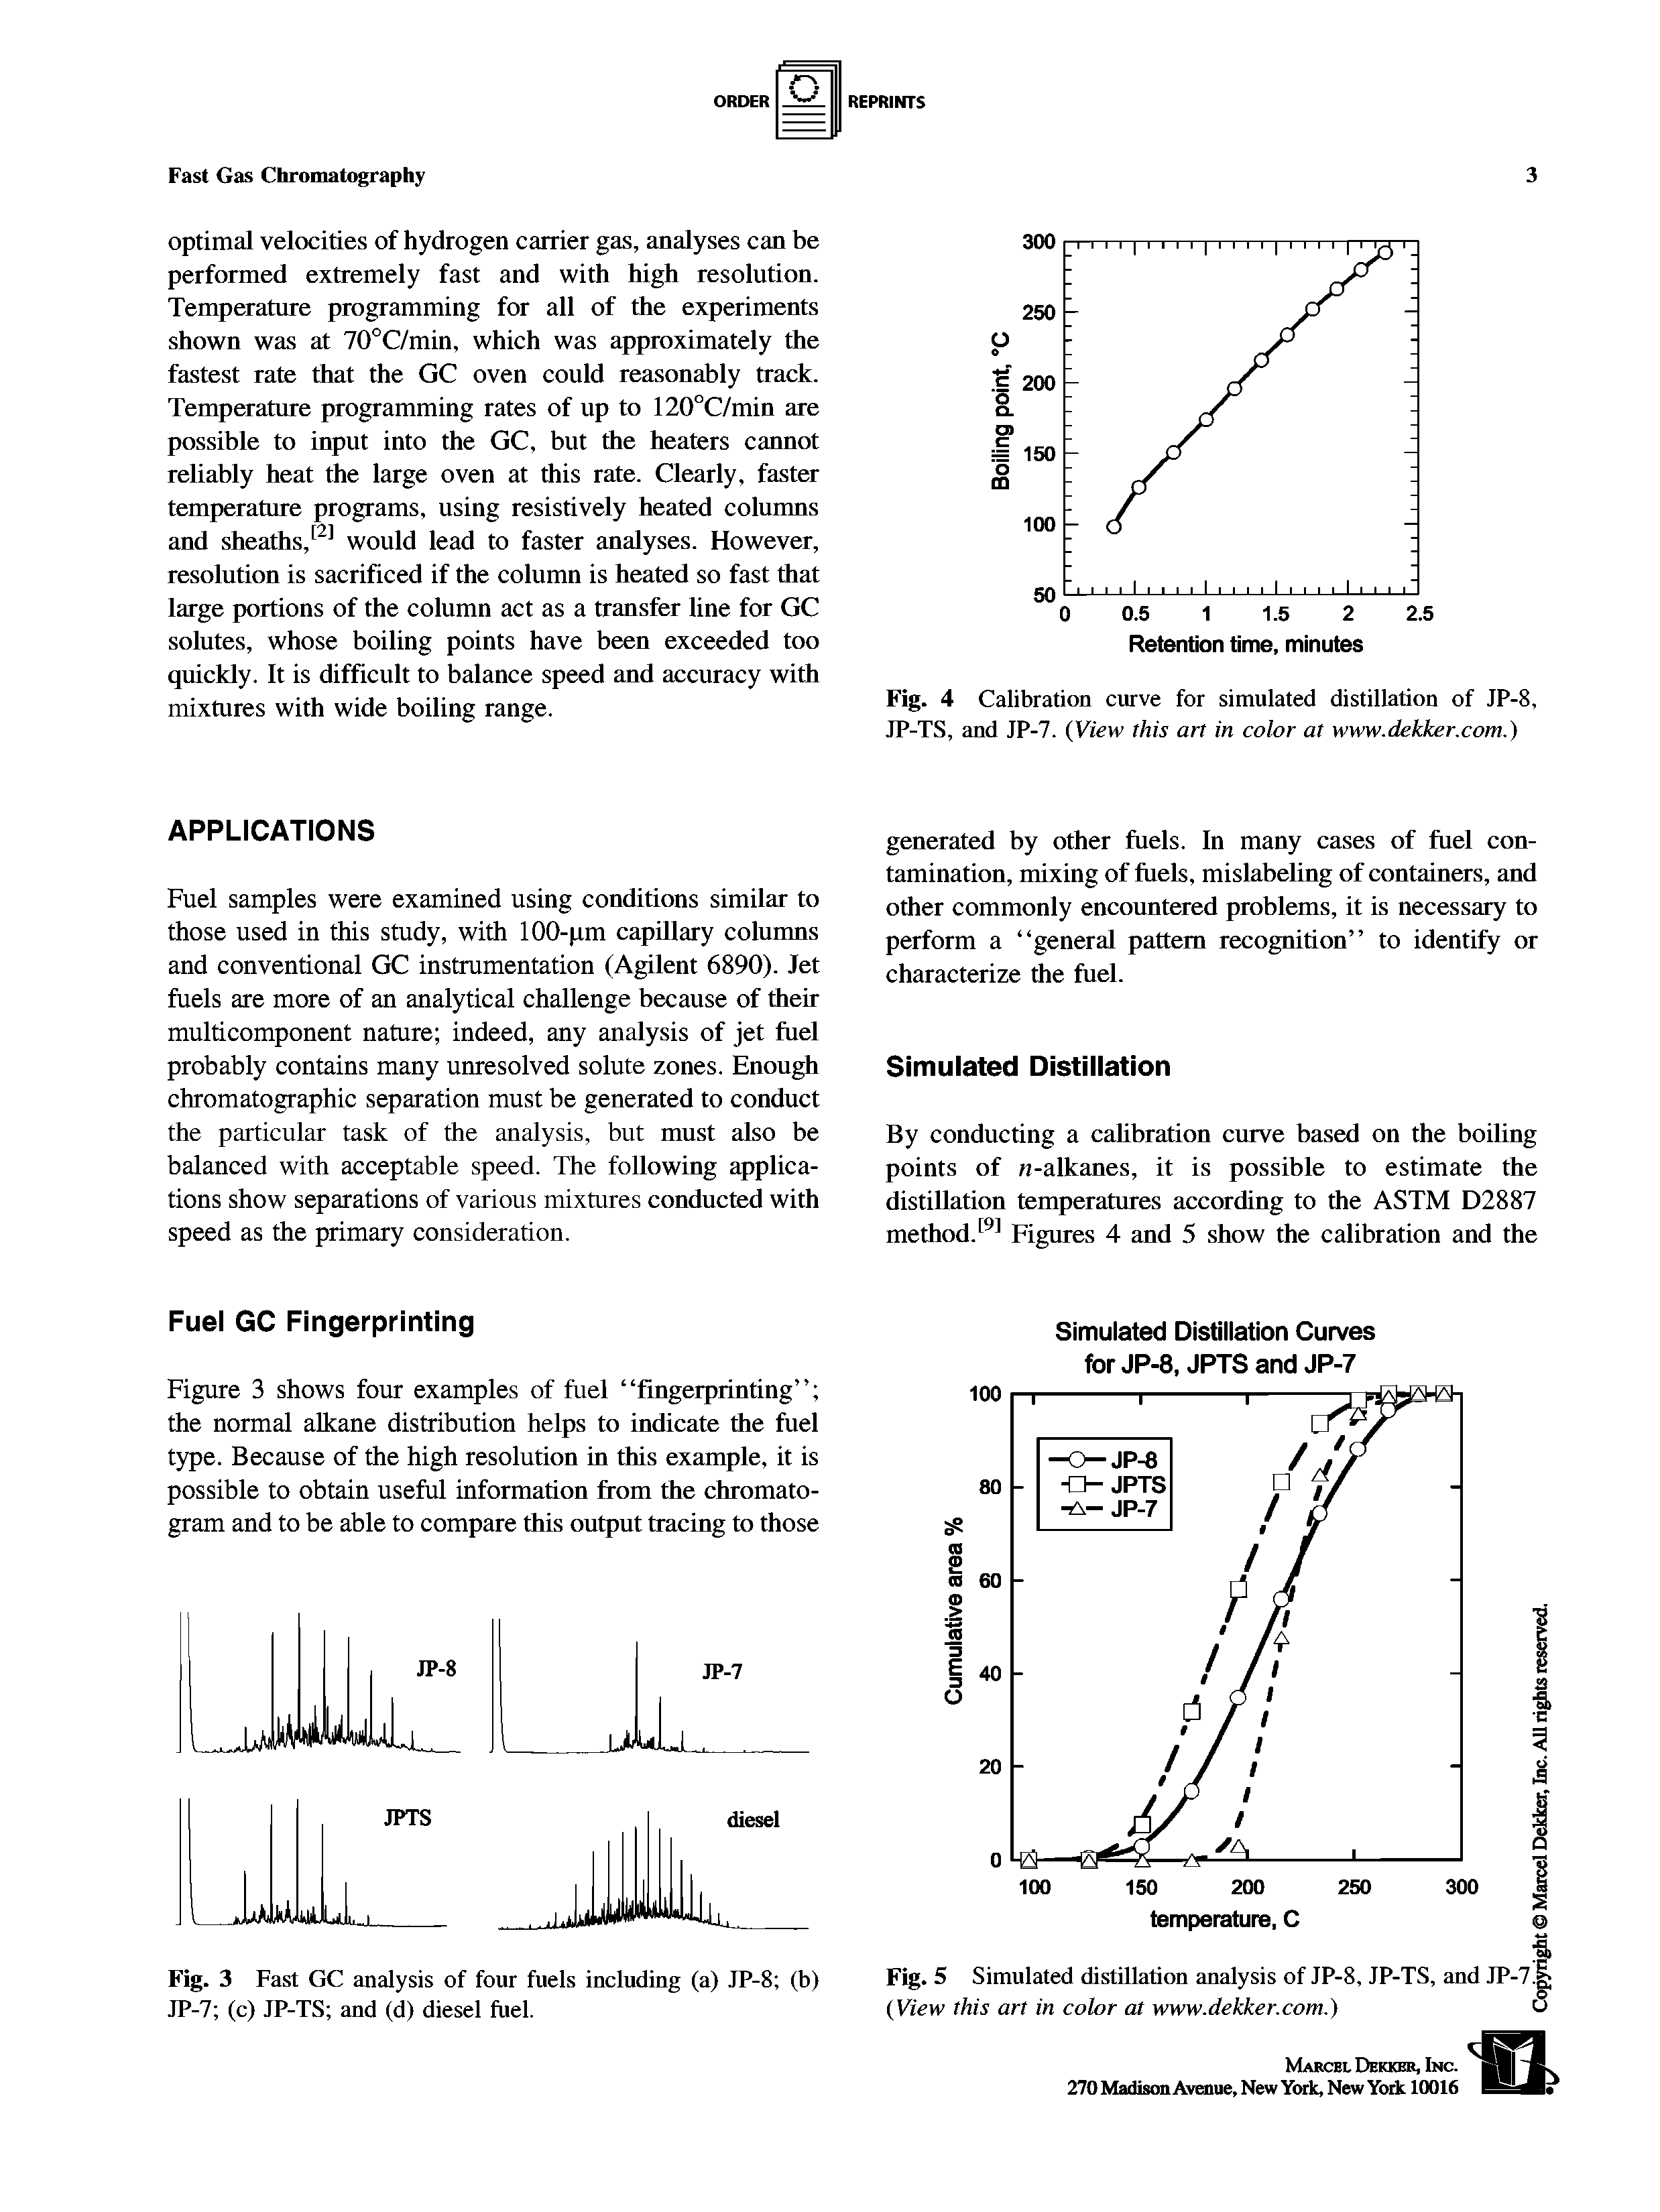 Fig. 3 Fast GC analysis of four fuels including (a) JP-8 (b) JP-7 (c) JP-TS and (d) diesel fuel.